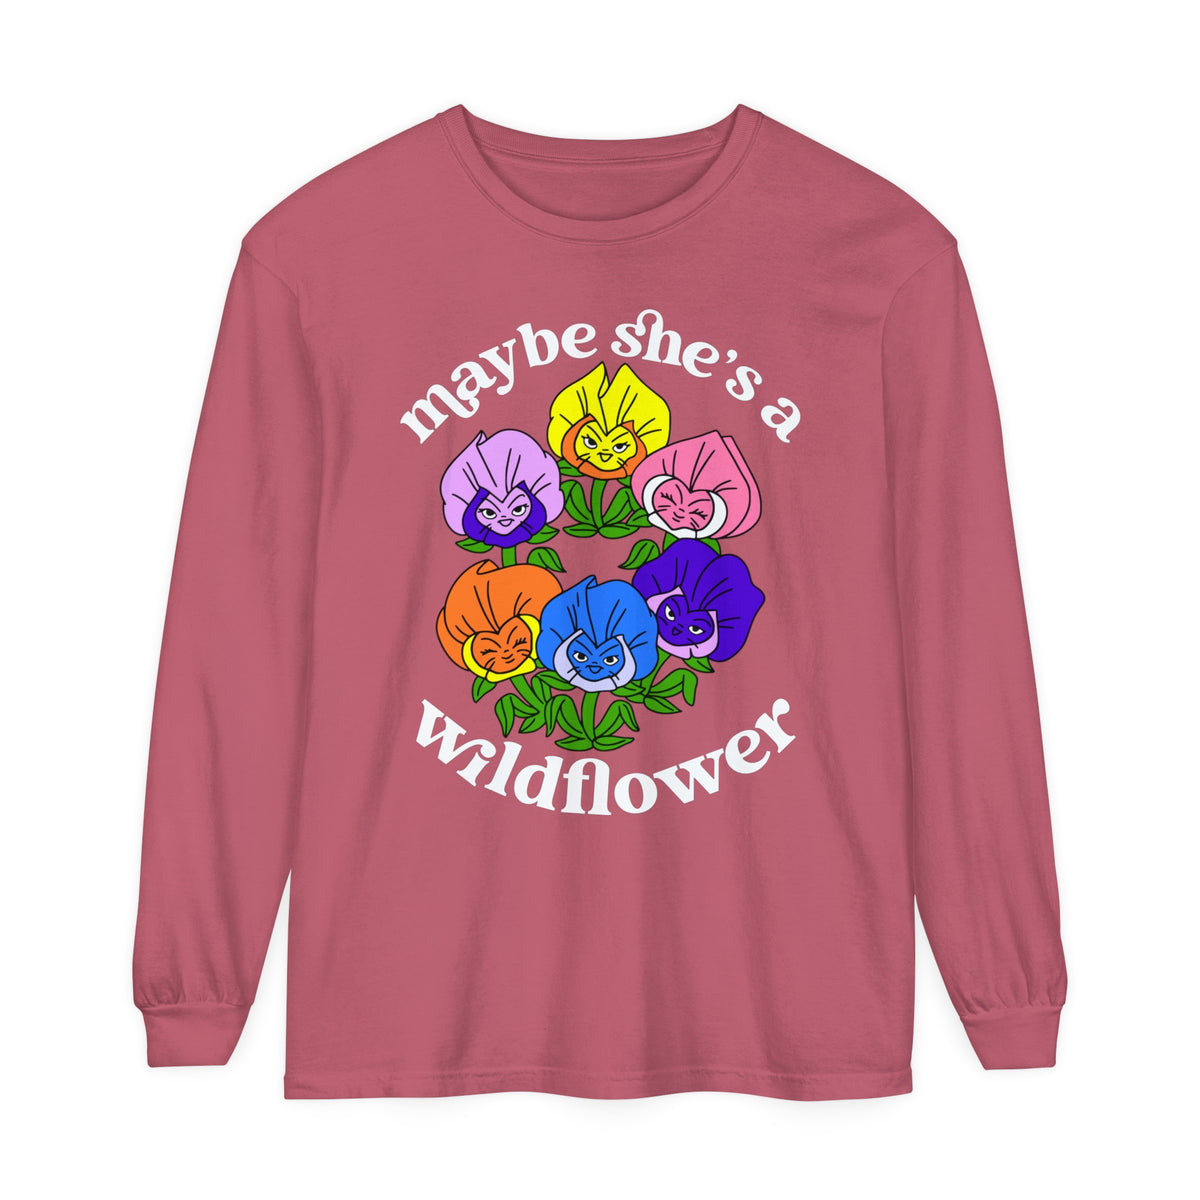 Maybe She’s A Wildflower Comfort Colors Unisex Garment-dyed Long Sleeve T-Shirt